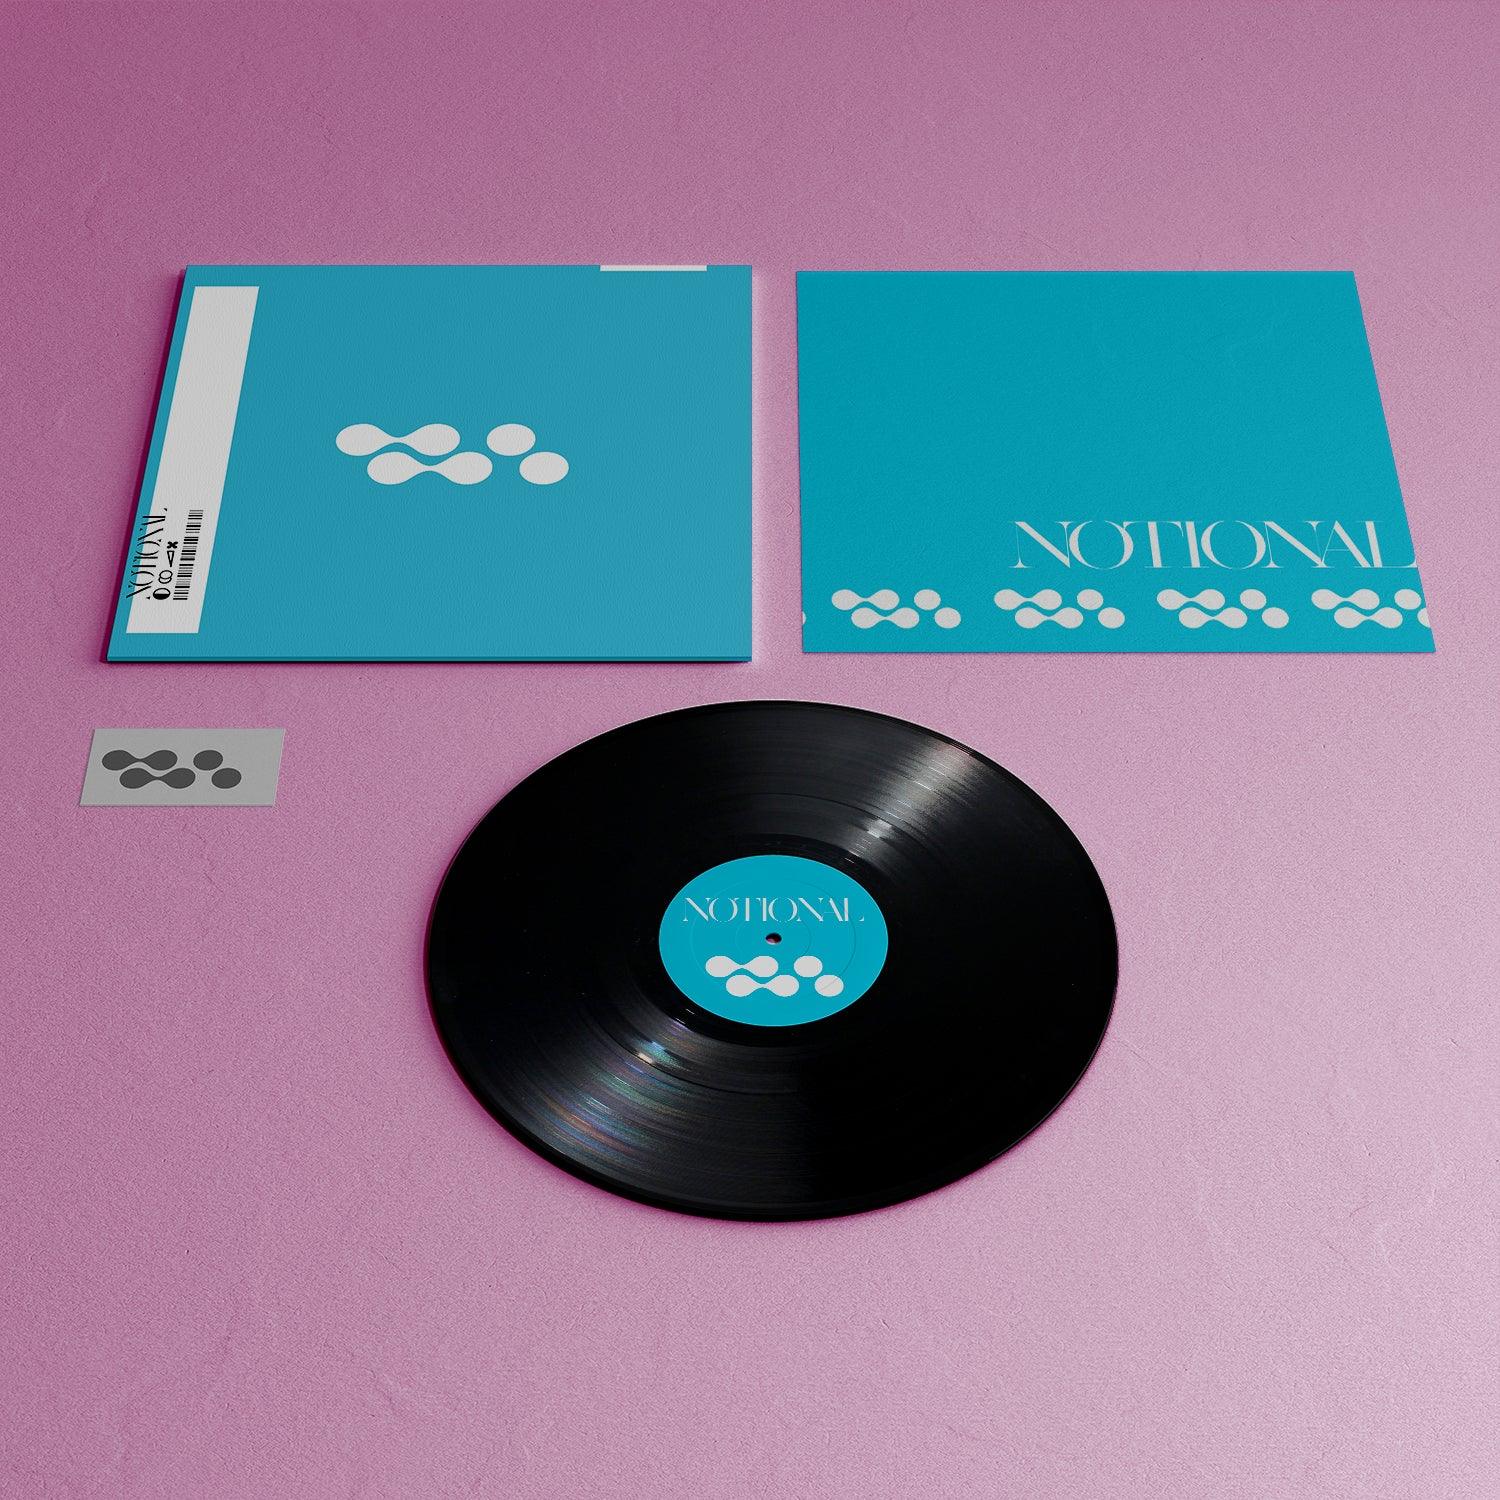 Customizable 12" Vinyl Mockup! Disc, Sleeve, Inner Sleeve & Download Card. Flat on Pink Background. Low Angle View.